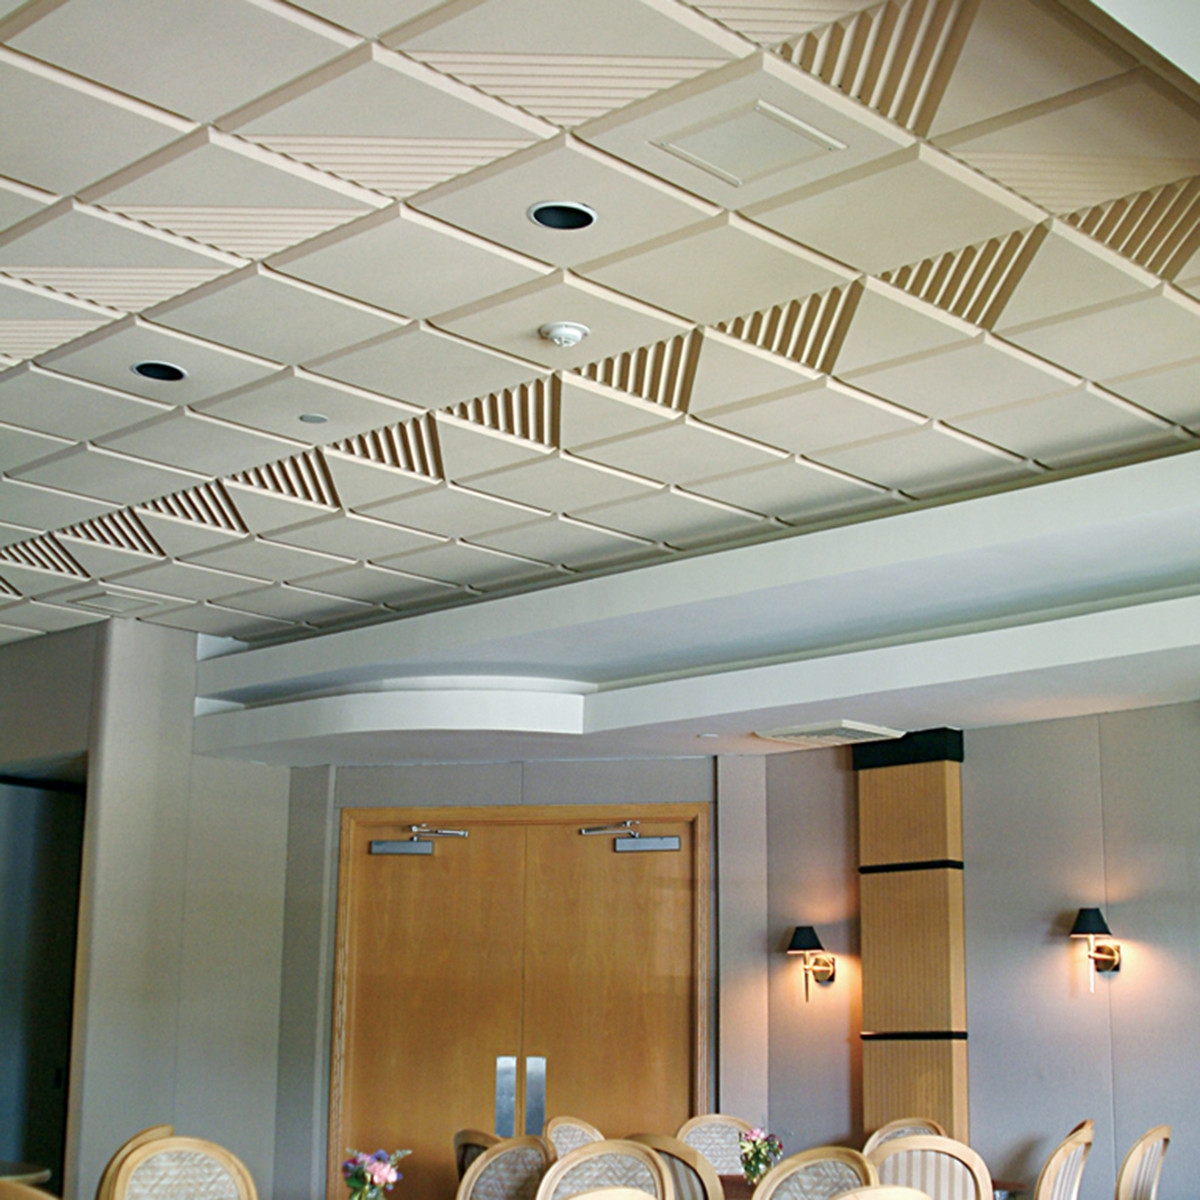 Sound Absorbing Drop Ceiling Tiles Sound Absorbing Drop Ceiling Tiles sonex contour ceiling tile acoustical solutions 1200 X 1200